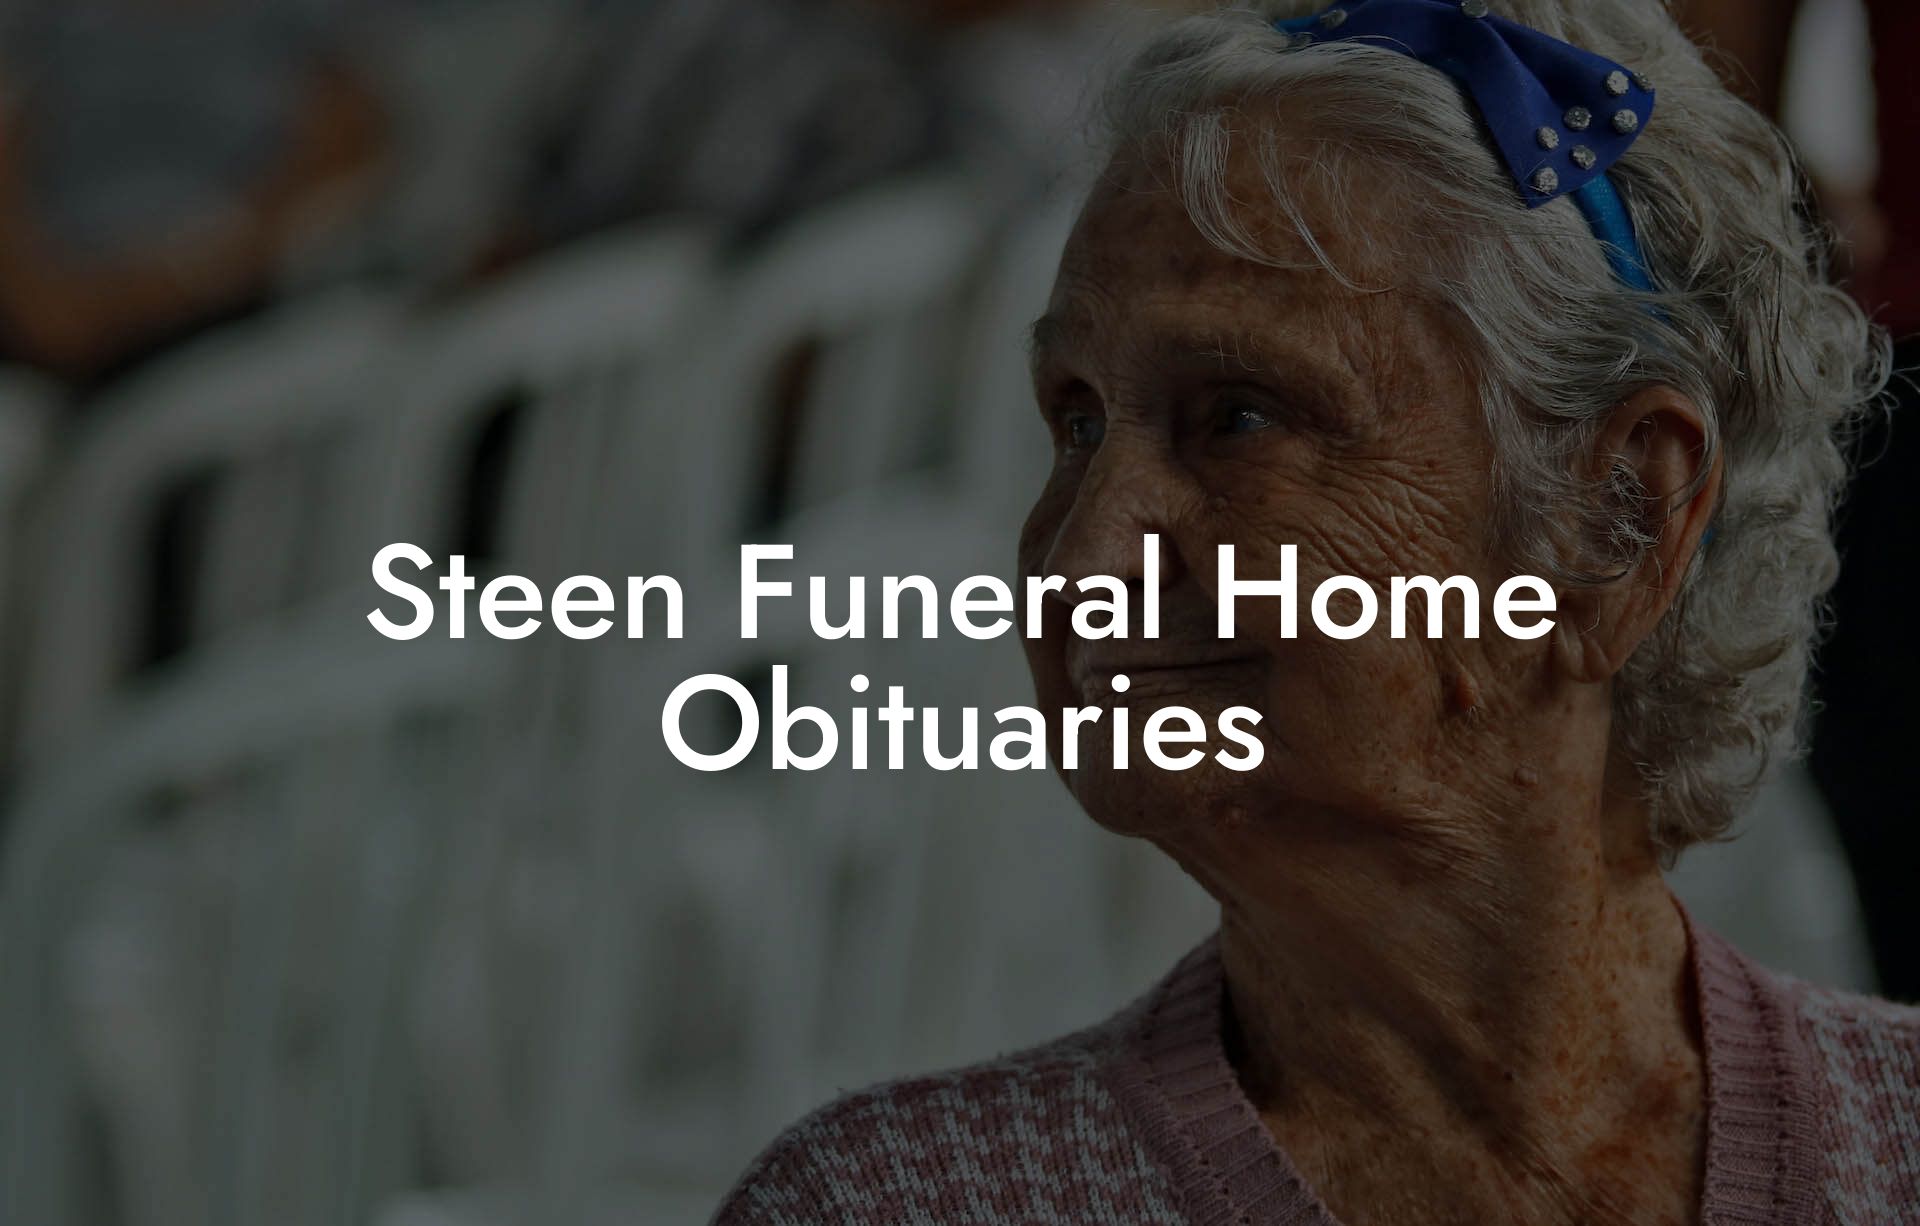 Steen Funeral Home Obituaries